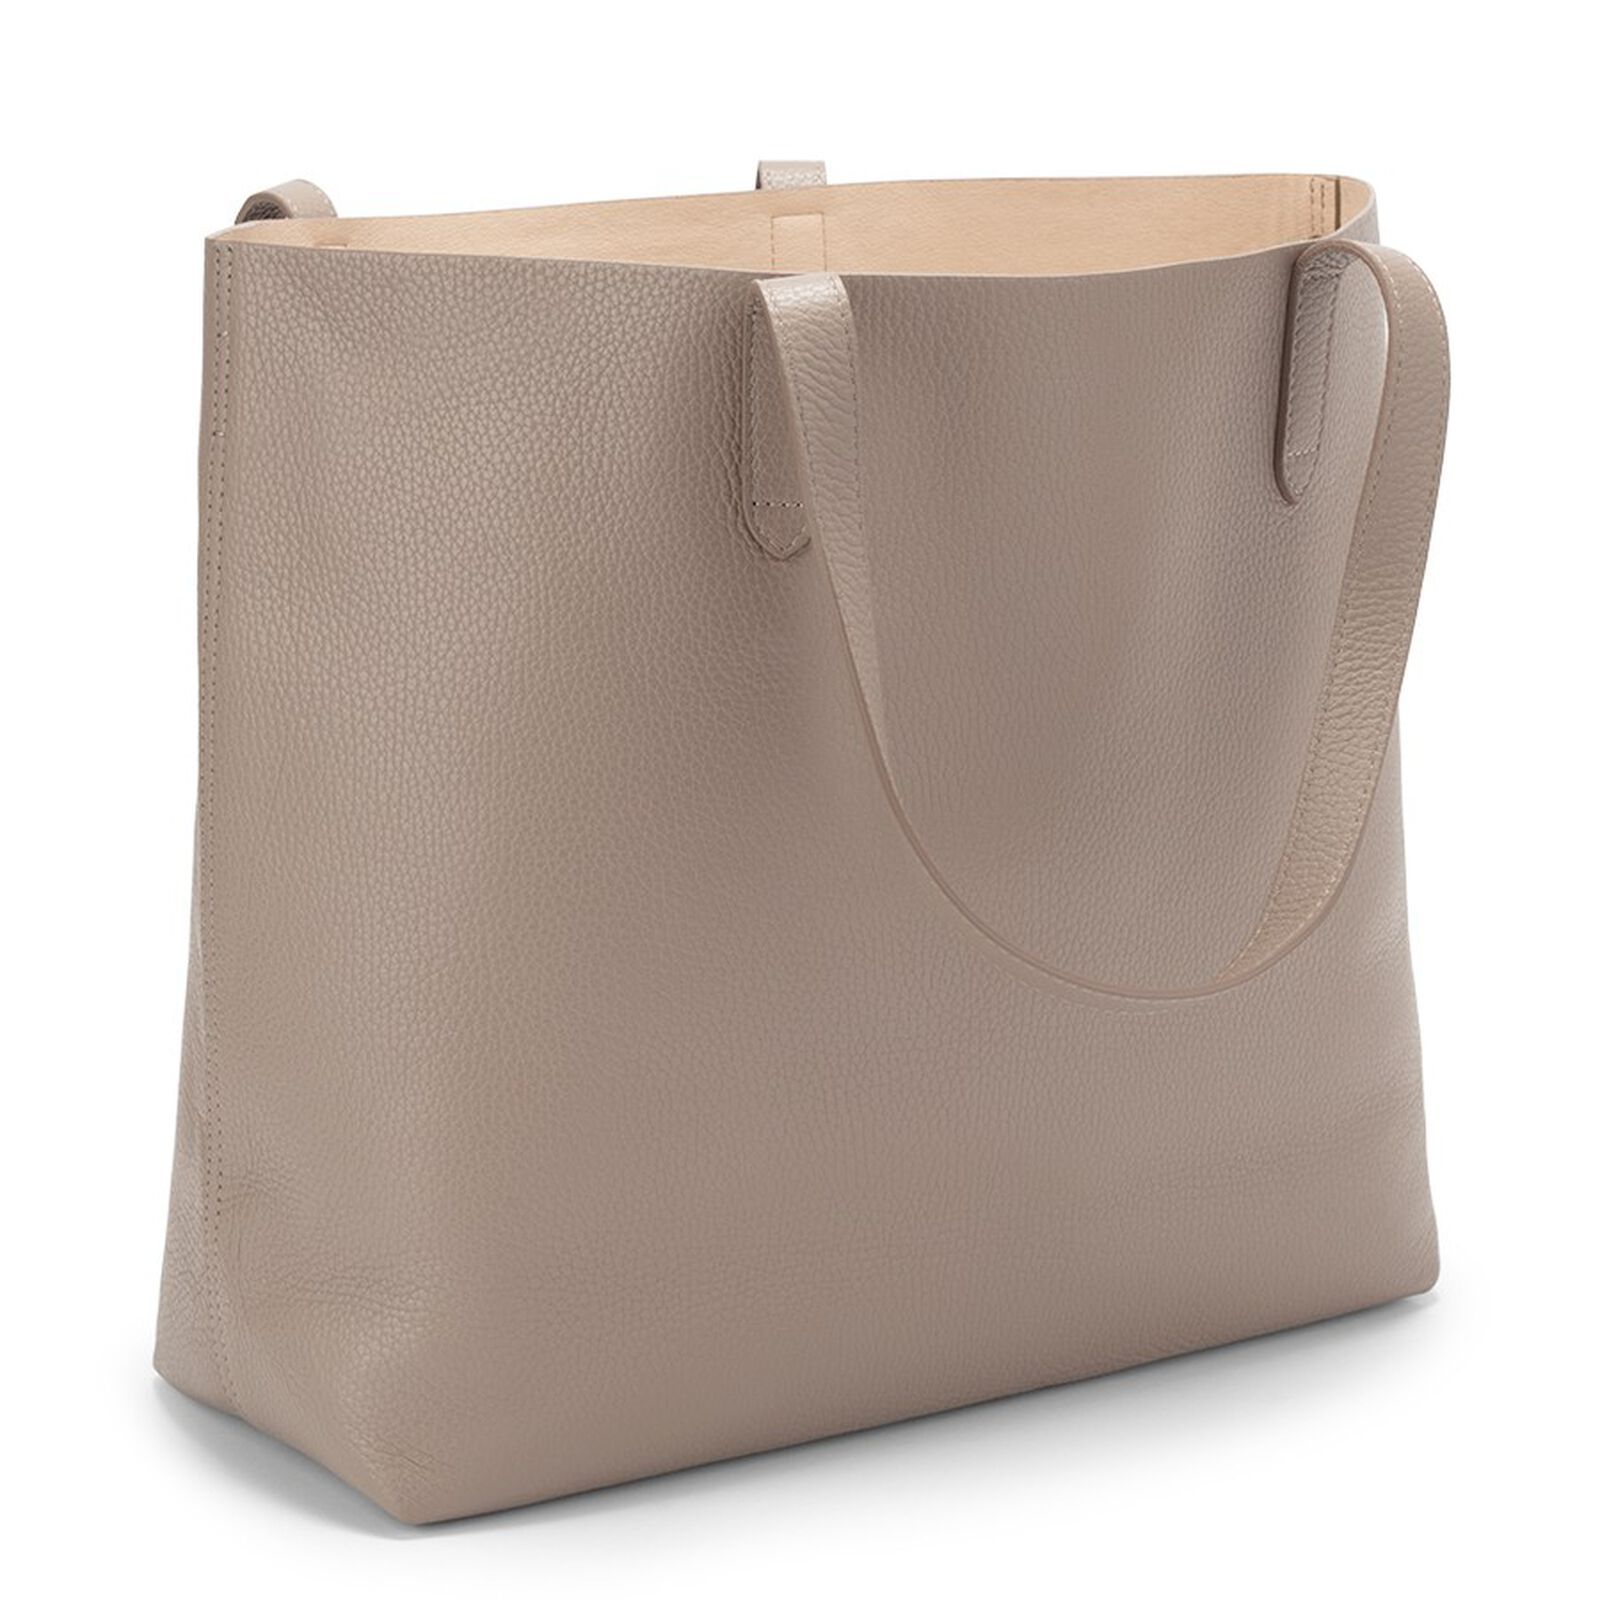 Classic Structured Tote